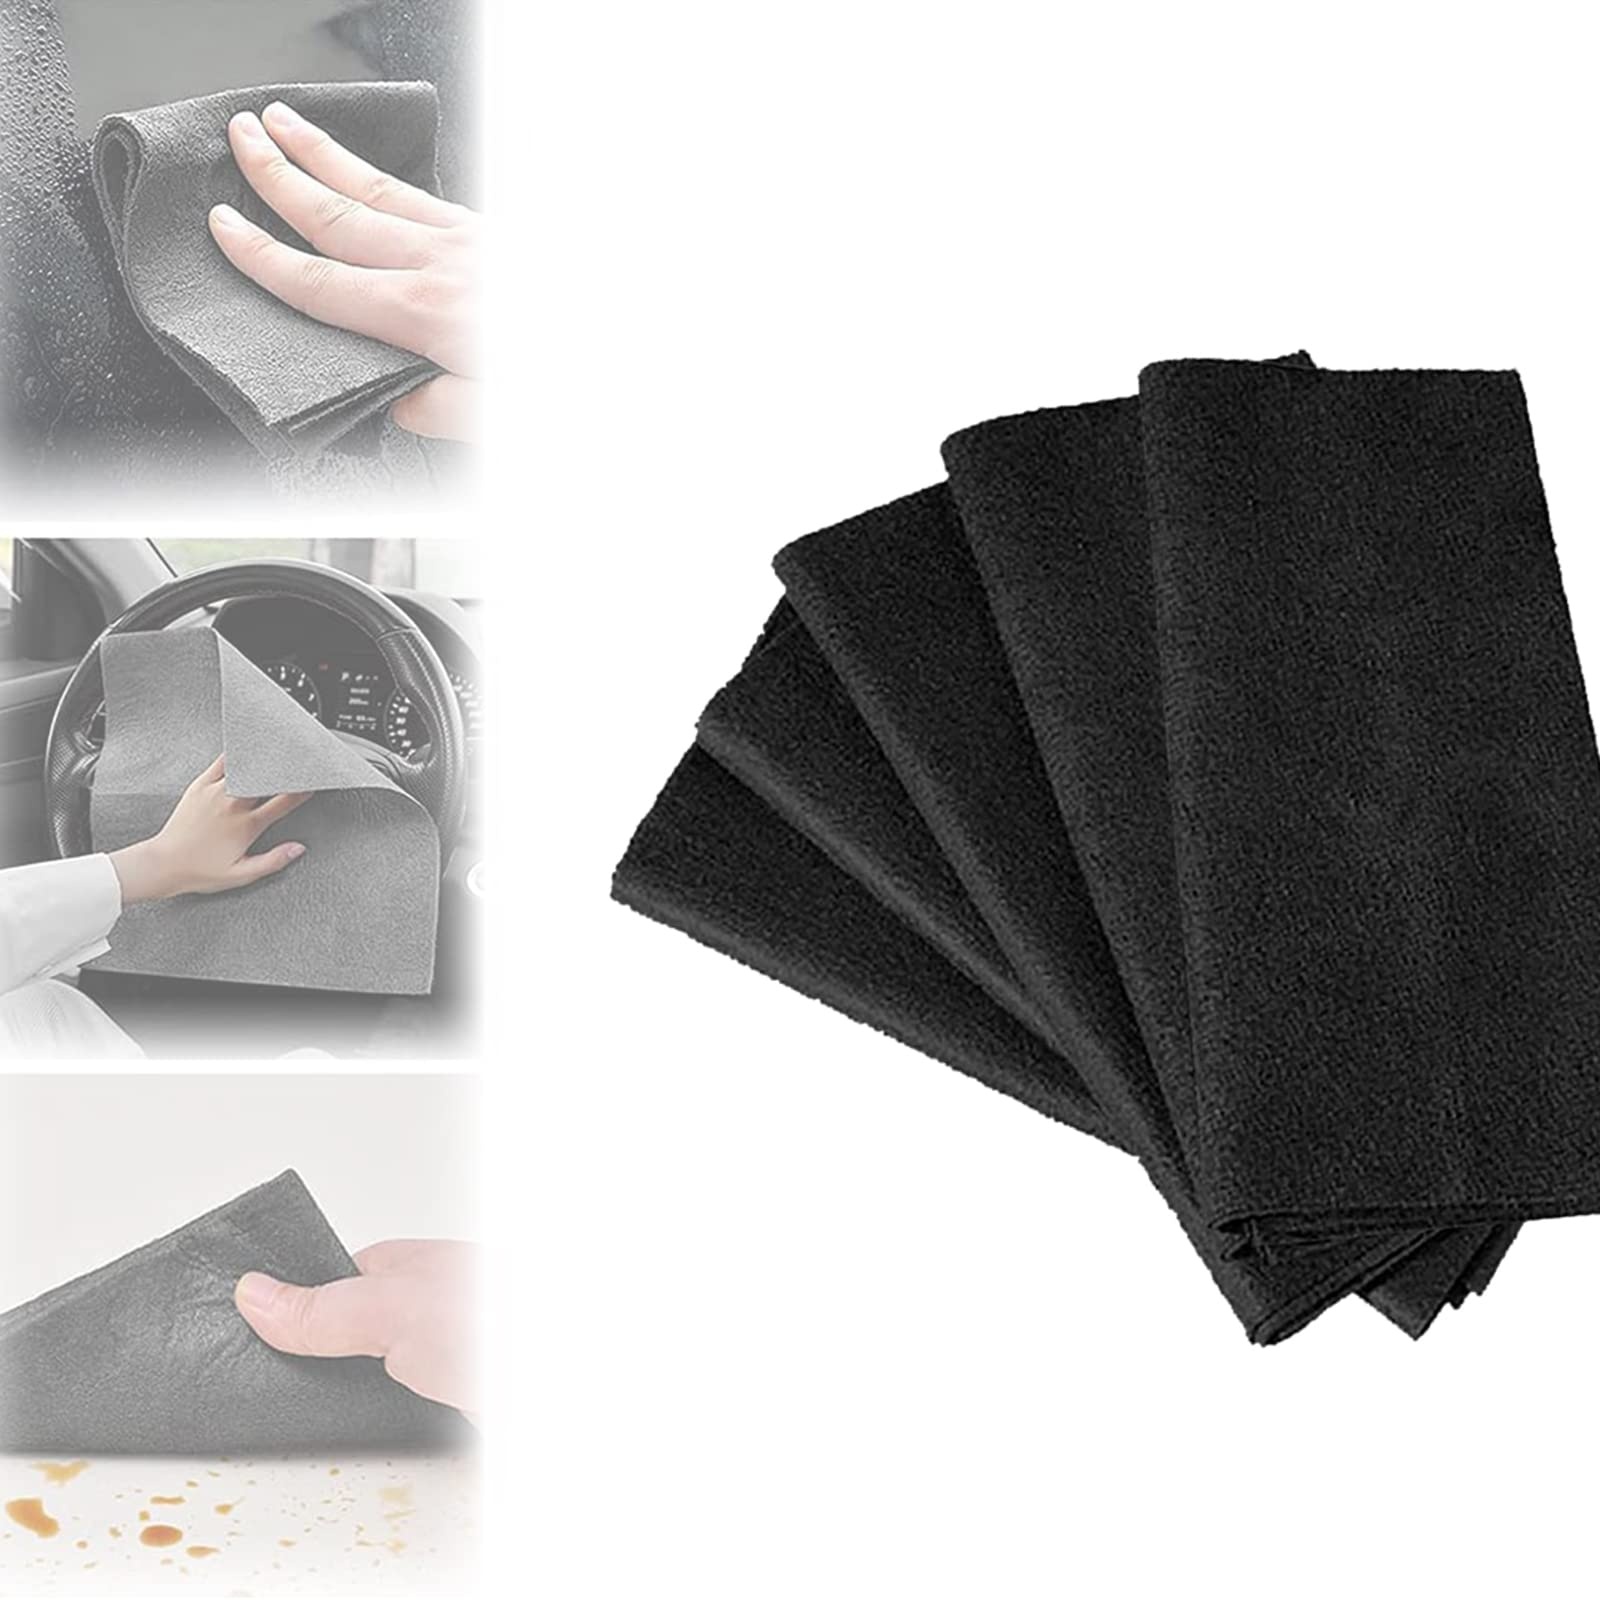 Thickened Magic Cleaning Cloth,Magic Cleaning Cloth,Sonorou Cleaning Cloth,Streak Free Reusable Microfiber Cleaning Rags,for Glass Windows Cleaning (5 pcs-Black,7.9 * 11.8 Inch)